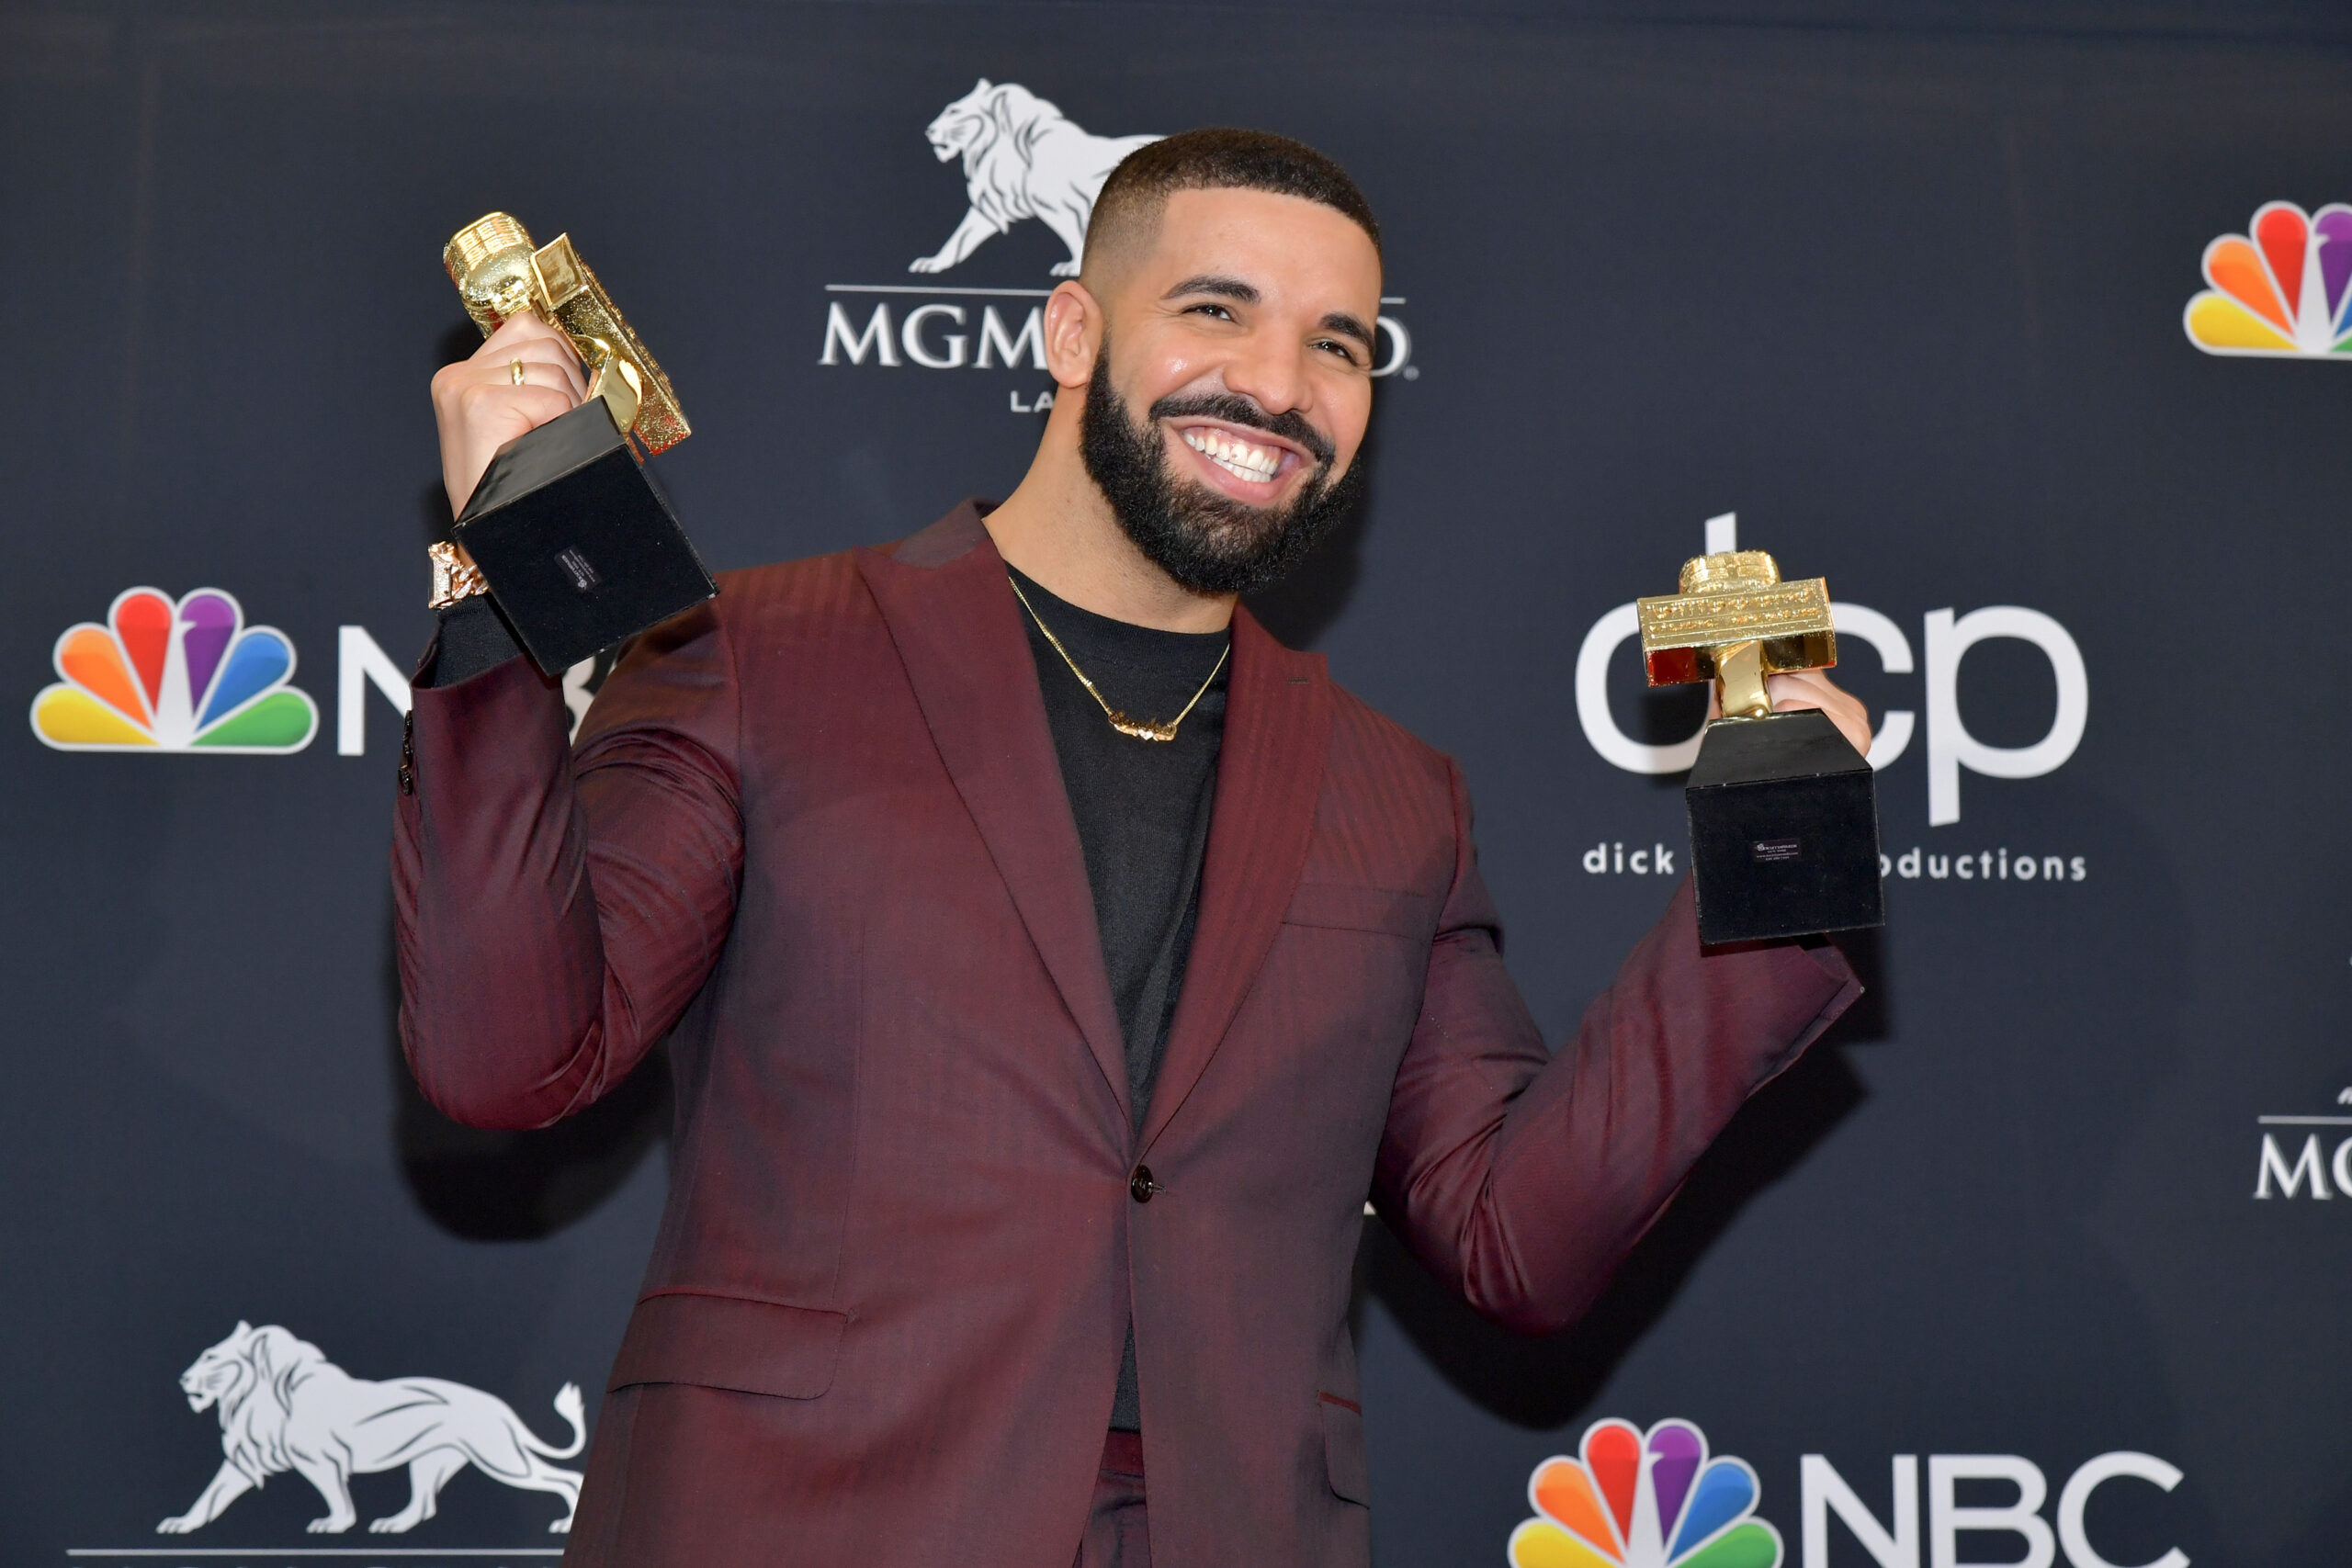 Drake’s $250 Million Net Worth Places Him Among the Wealthiest Rappers